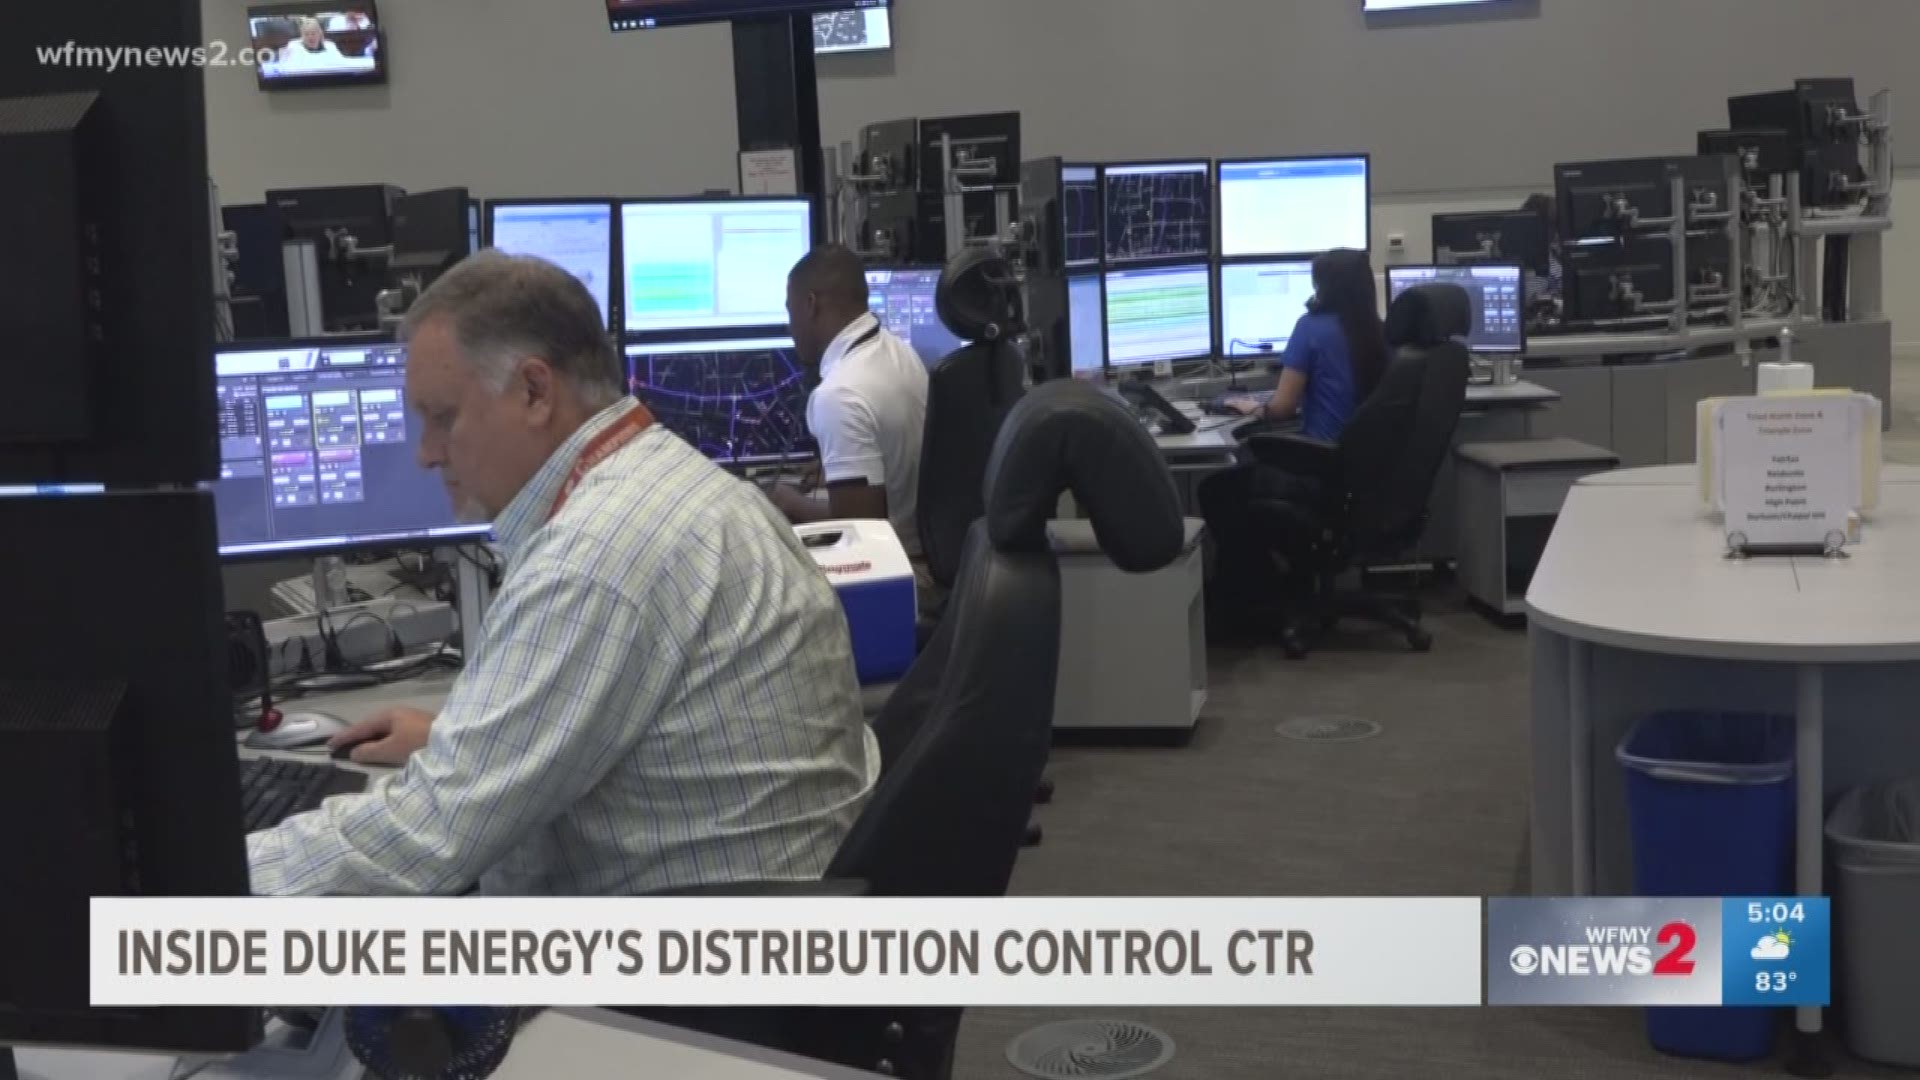 The 24 hour operation can staff up to 36 grid operators during a major storm and the new automated reporting system can handle up to 100,000 calls an hour.